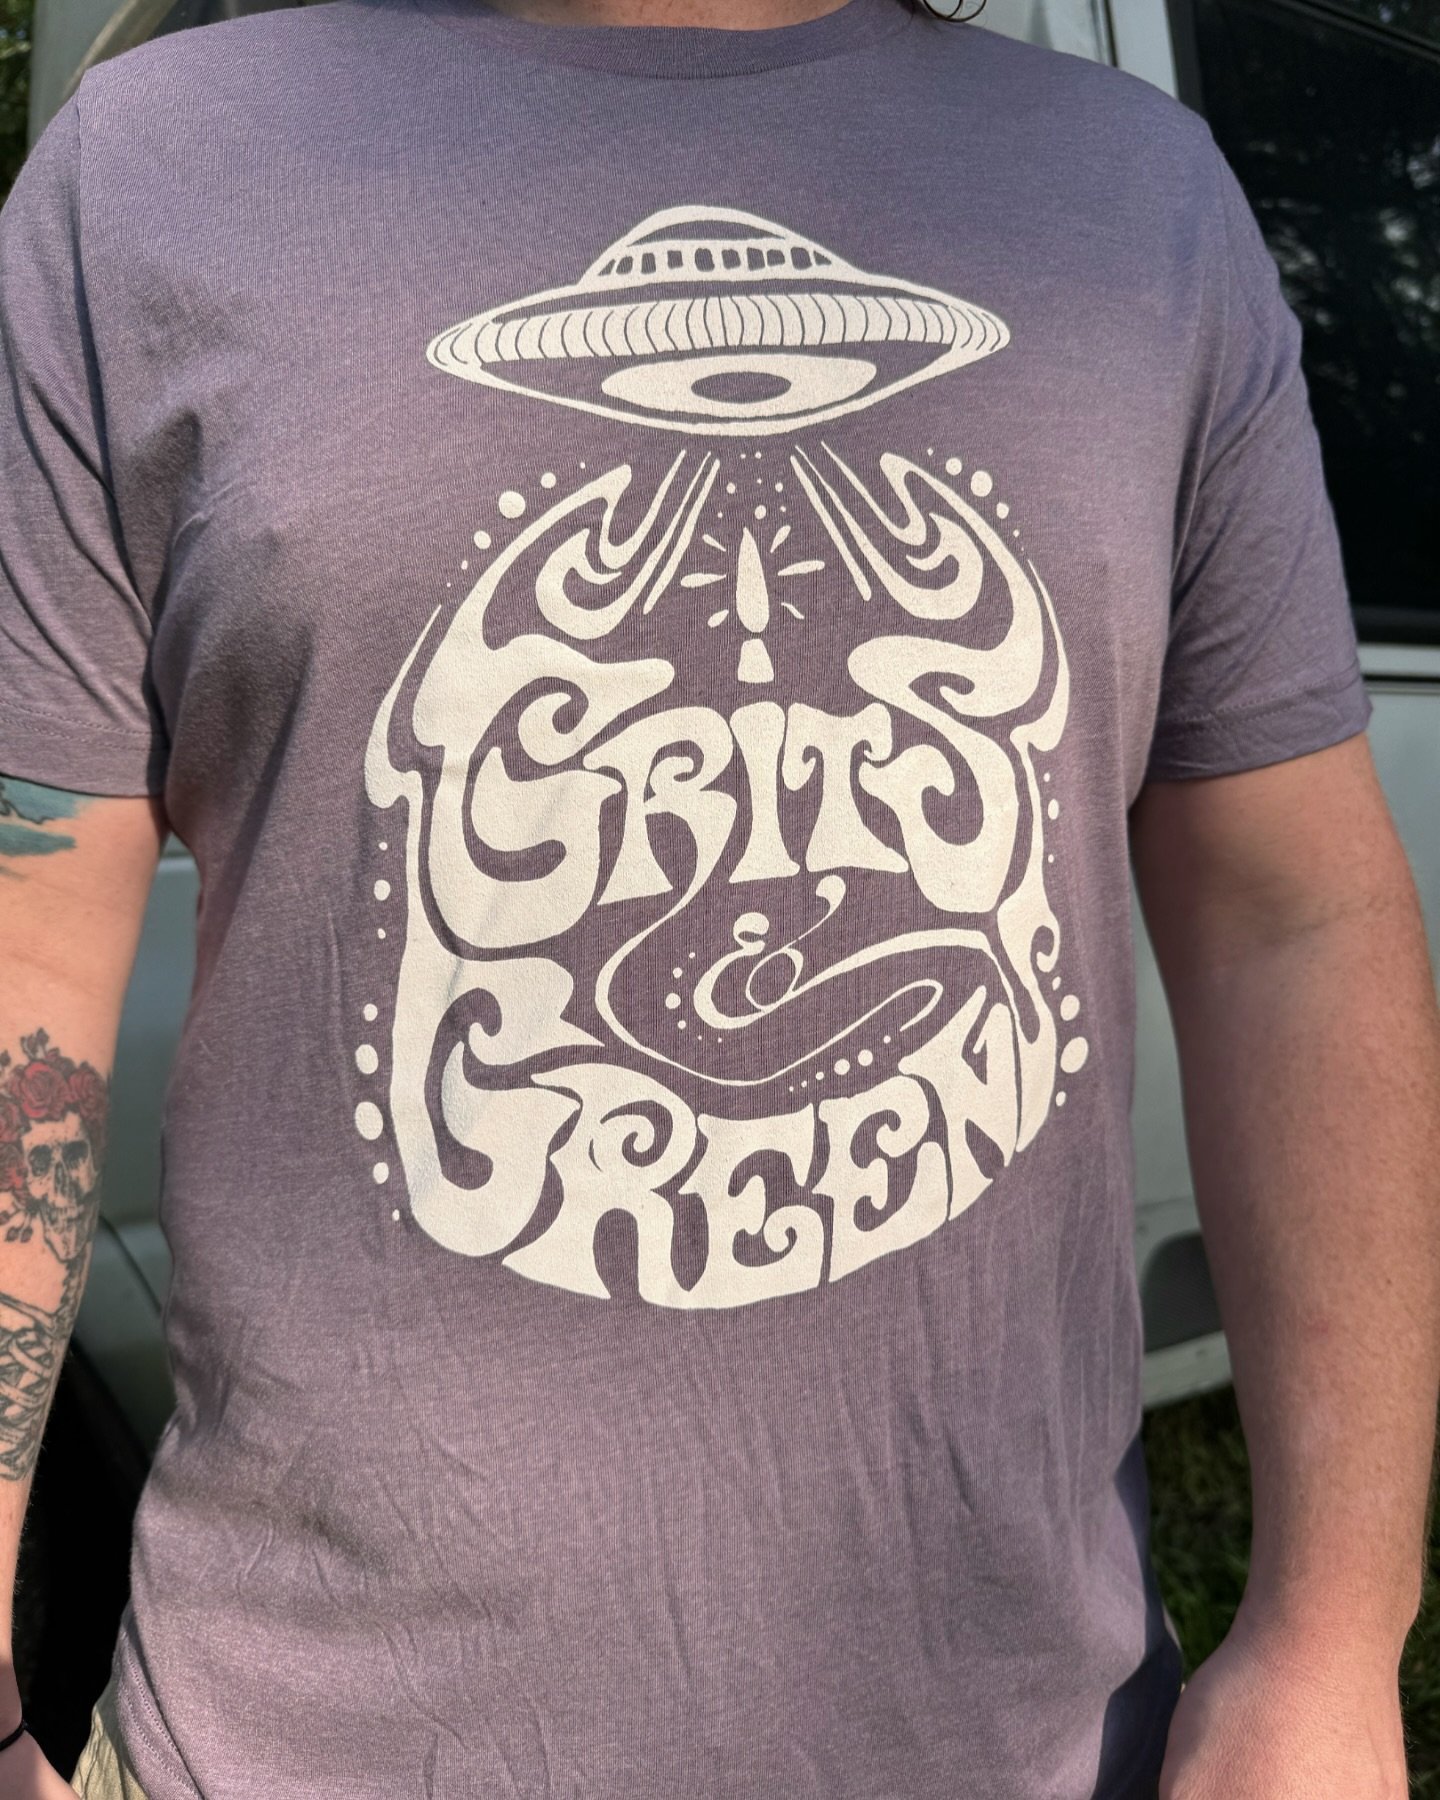 NEW MERCH!! We teamed up with the incomparable @astralburrito to bring you this brand new design! Be the first one to snag one TONIGHT at @fortherecordmusichall with @ledbetterband85 kicking it off at 8PM 🤘 these shirts hit the online store on Monda